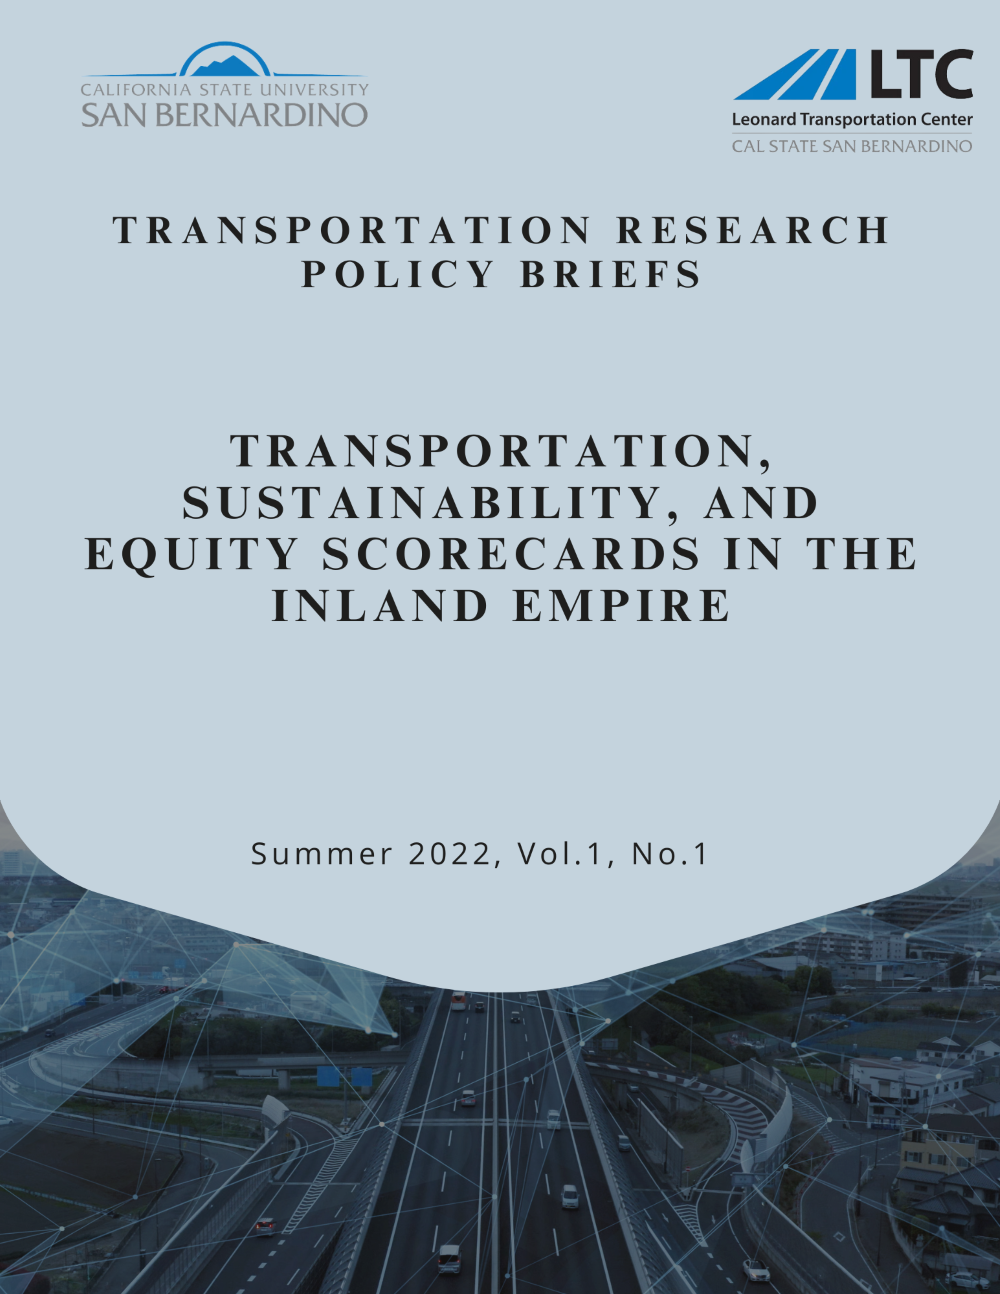 Transportation, Sustainability, and Equity Scorecards in the Inland Empire